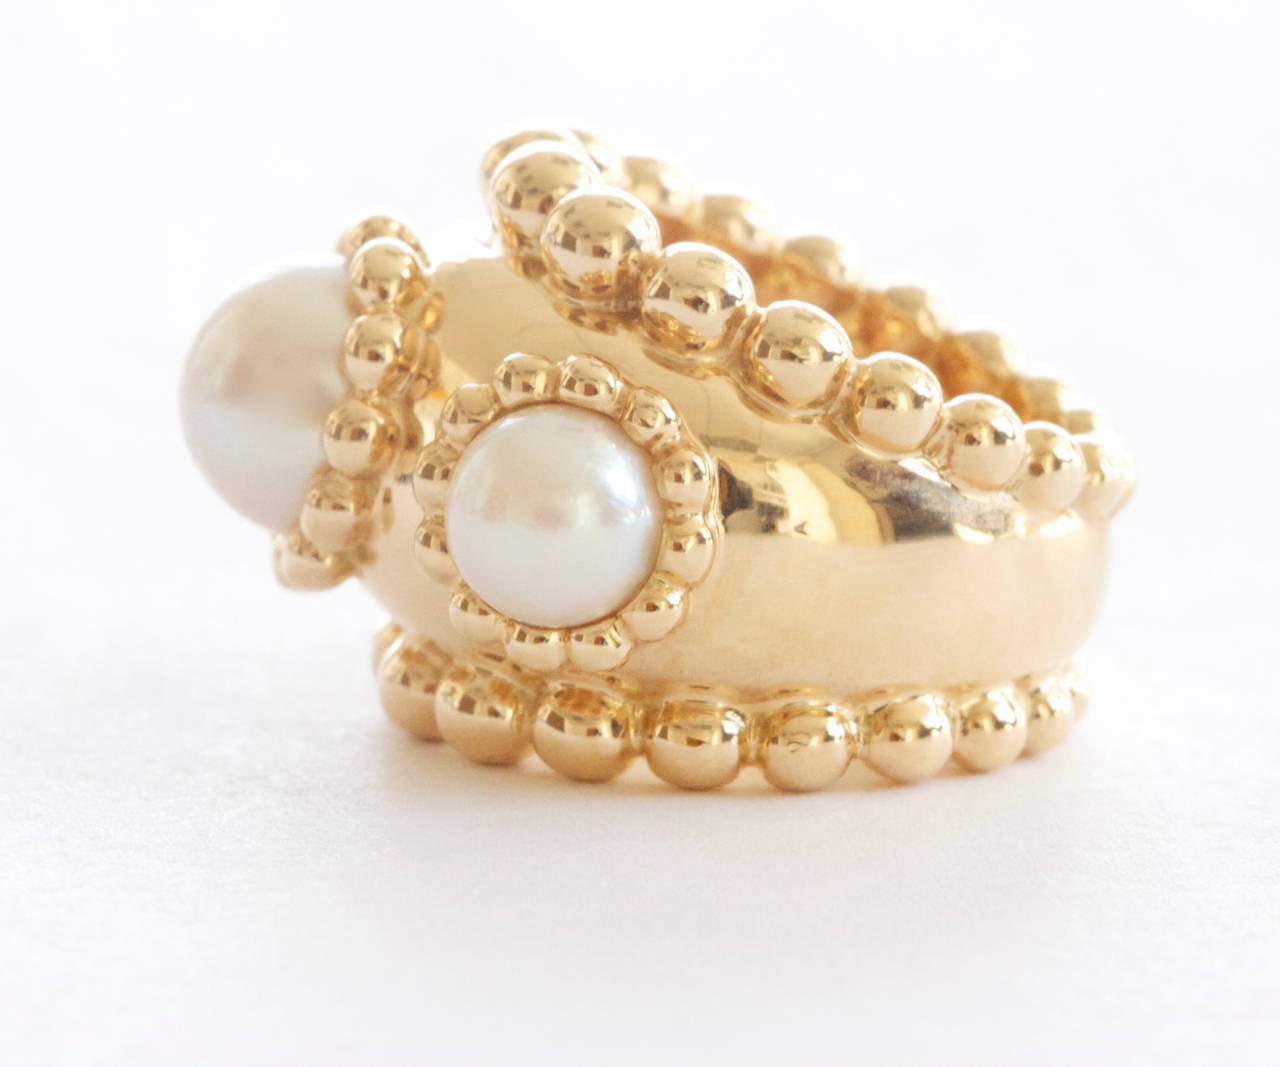 An identifiable creation from Chanel. Created with 3 white cultured pearls, a staple of Chanel jewelry. The pearls as well as the band of the ring have been outlined with perfectly spherical balls of 18k yellow gold. 

Signed Chanel with the